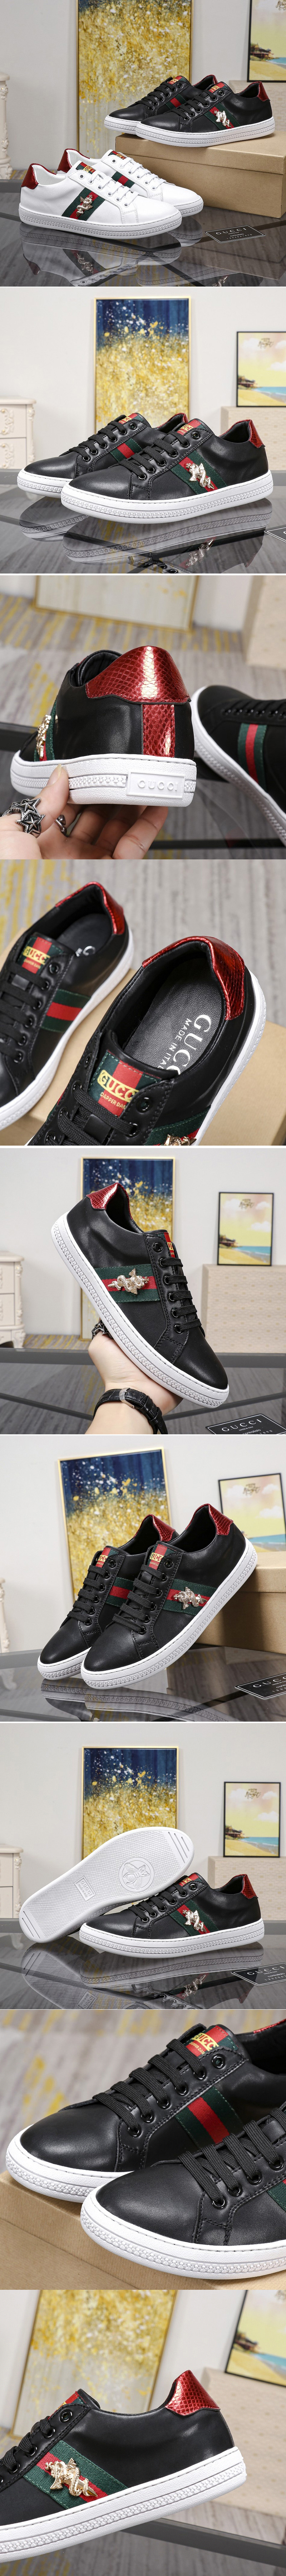 Replica Men's Gucci Ace embroidered sneaker Black Leather with web